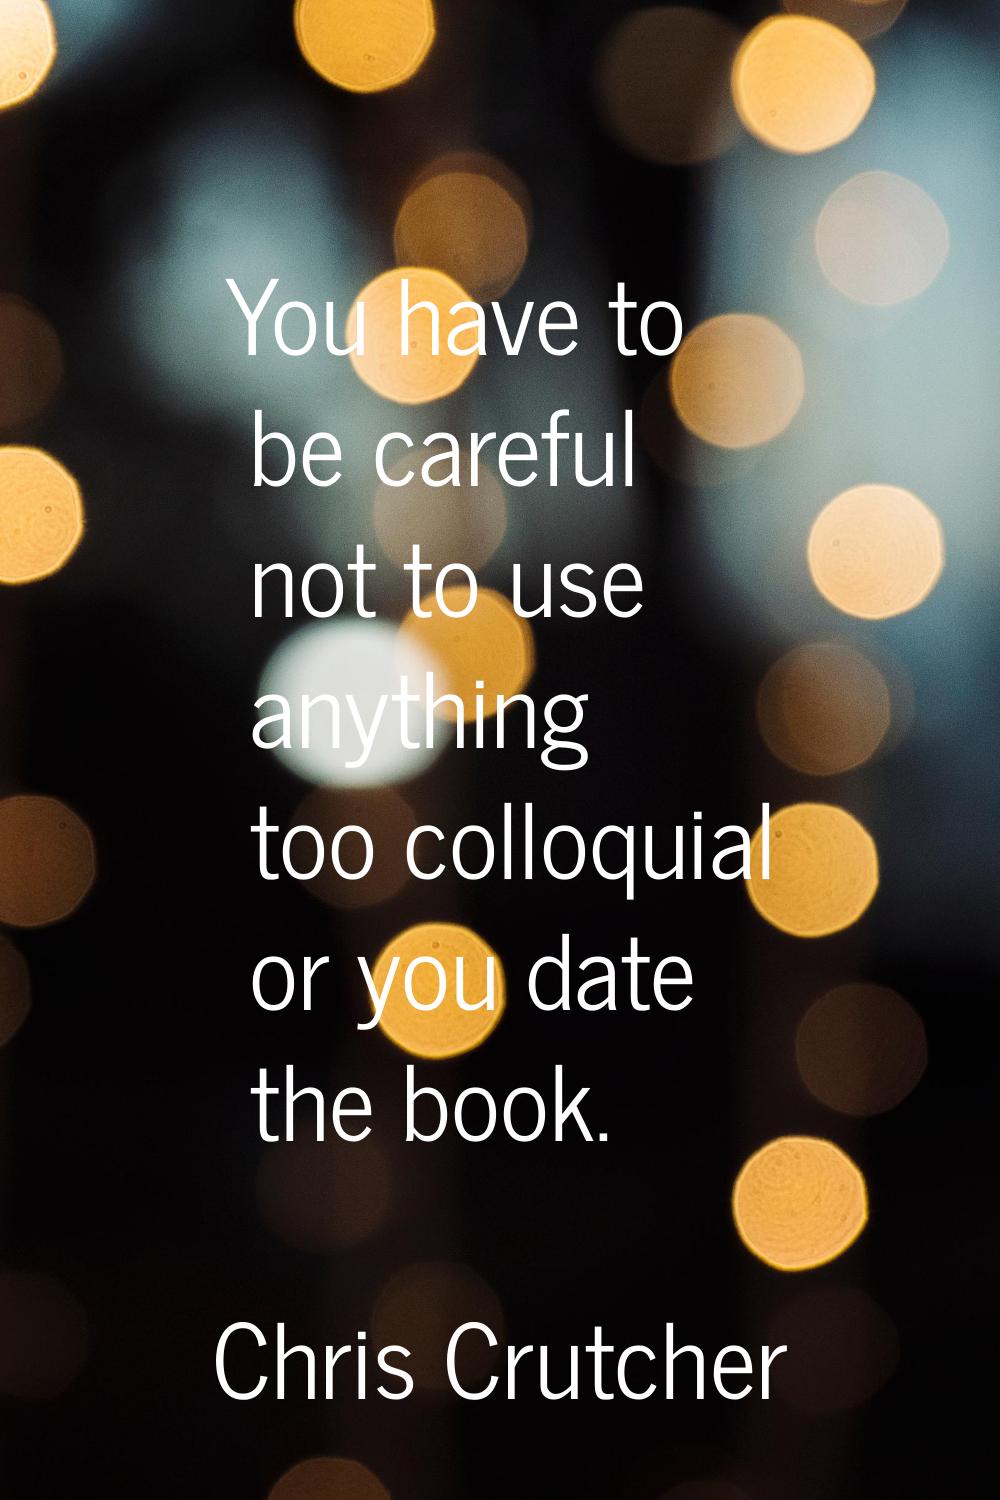 You have to be careful not to use anything too colloquial or you date the book.